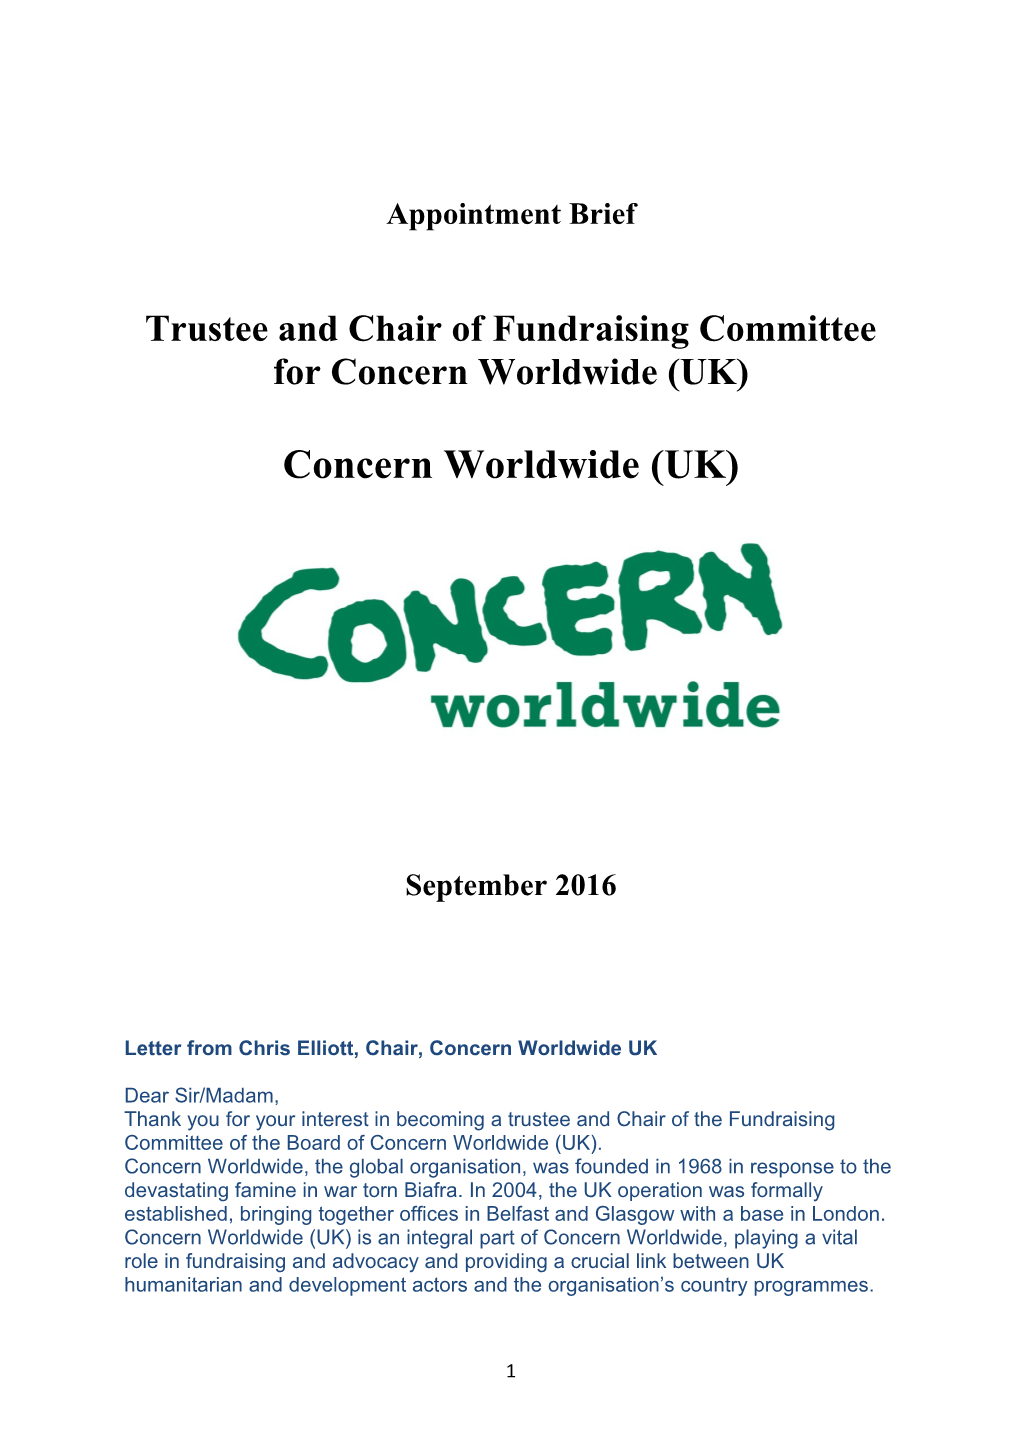 Trustee and Chair of Fundraising Committee for Concern Worldwide (UK)